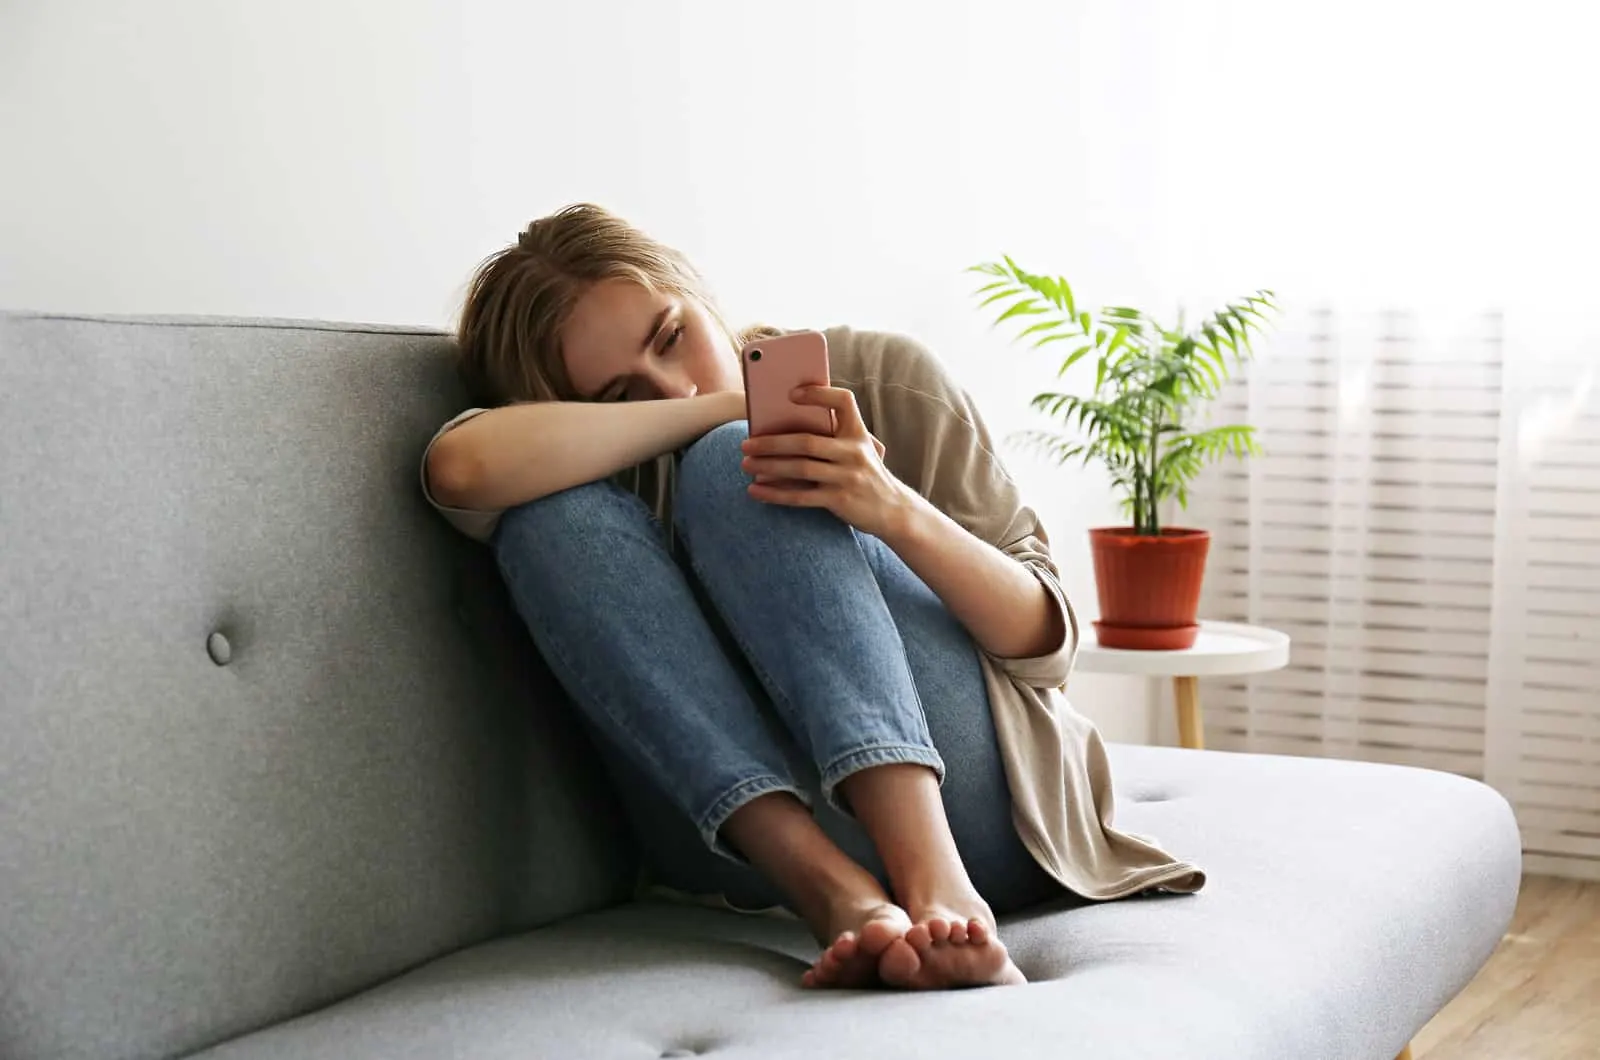 woman sitting on sofa holding her phone